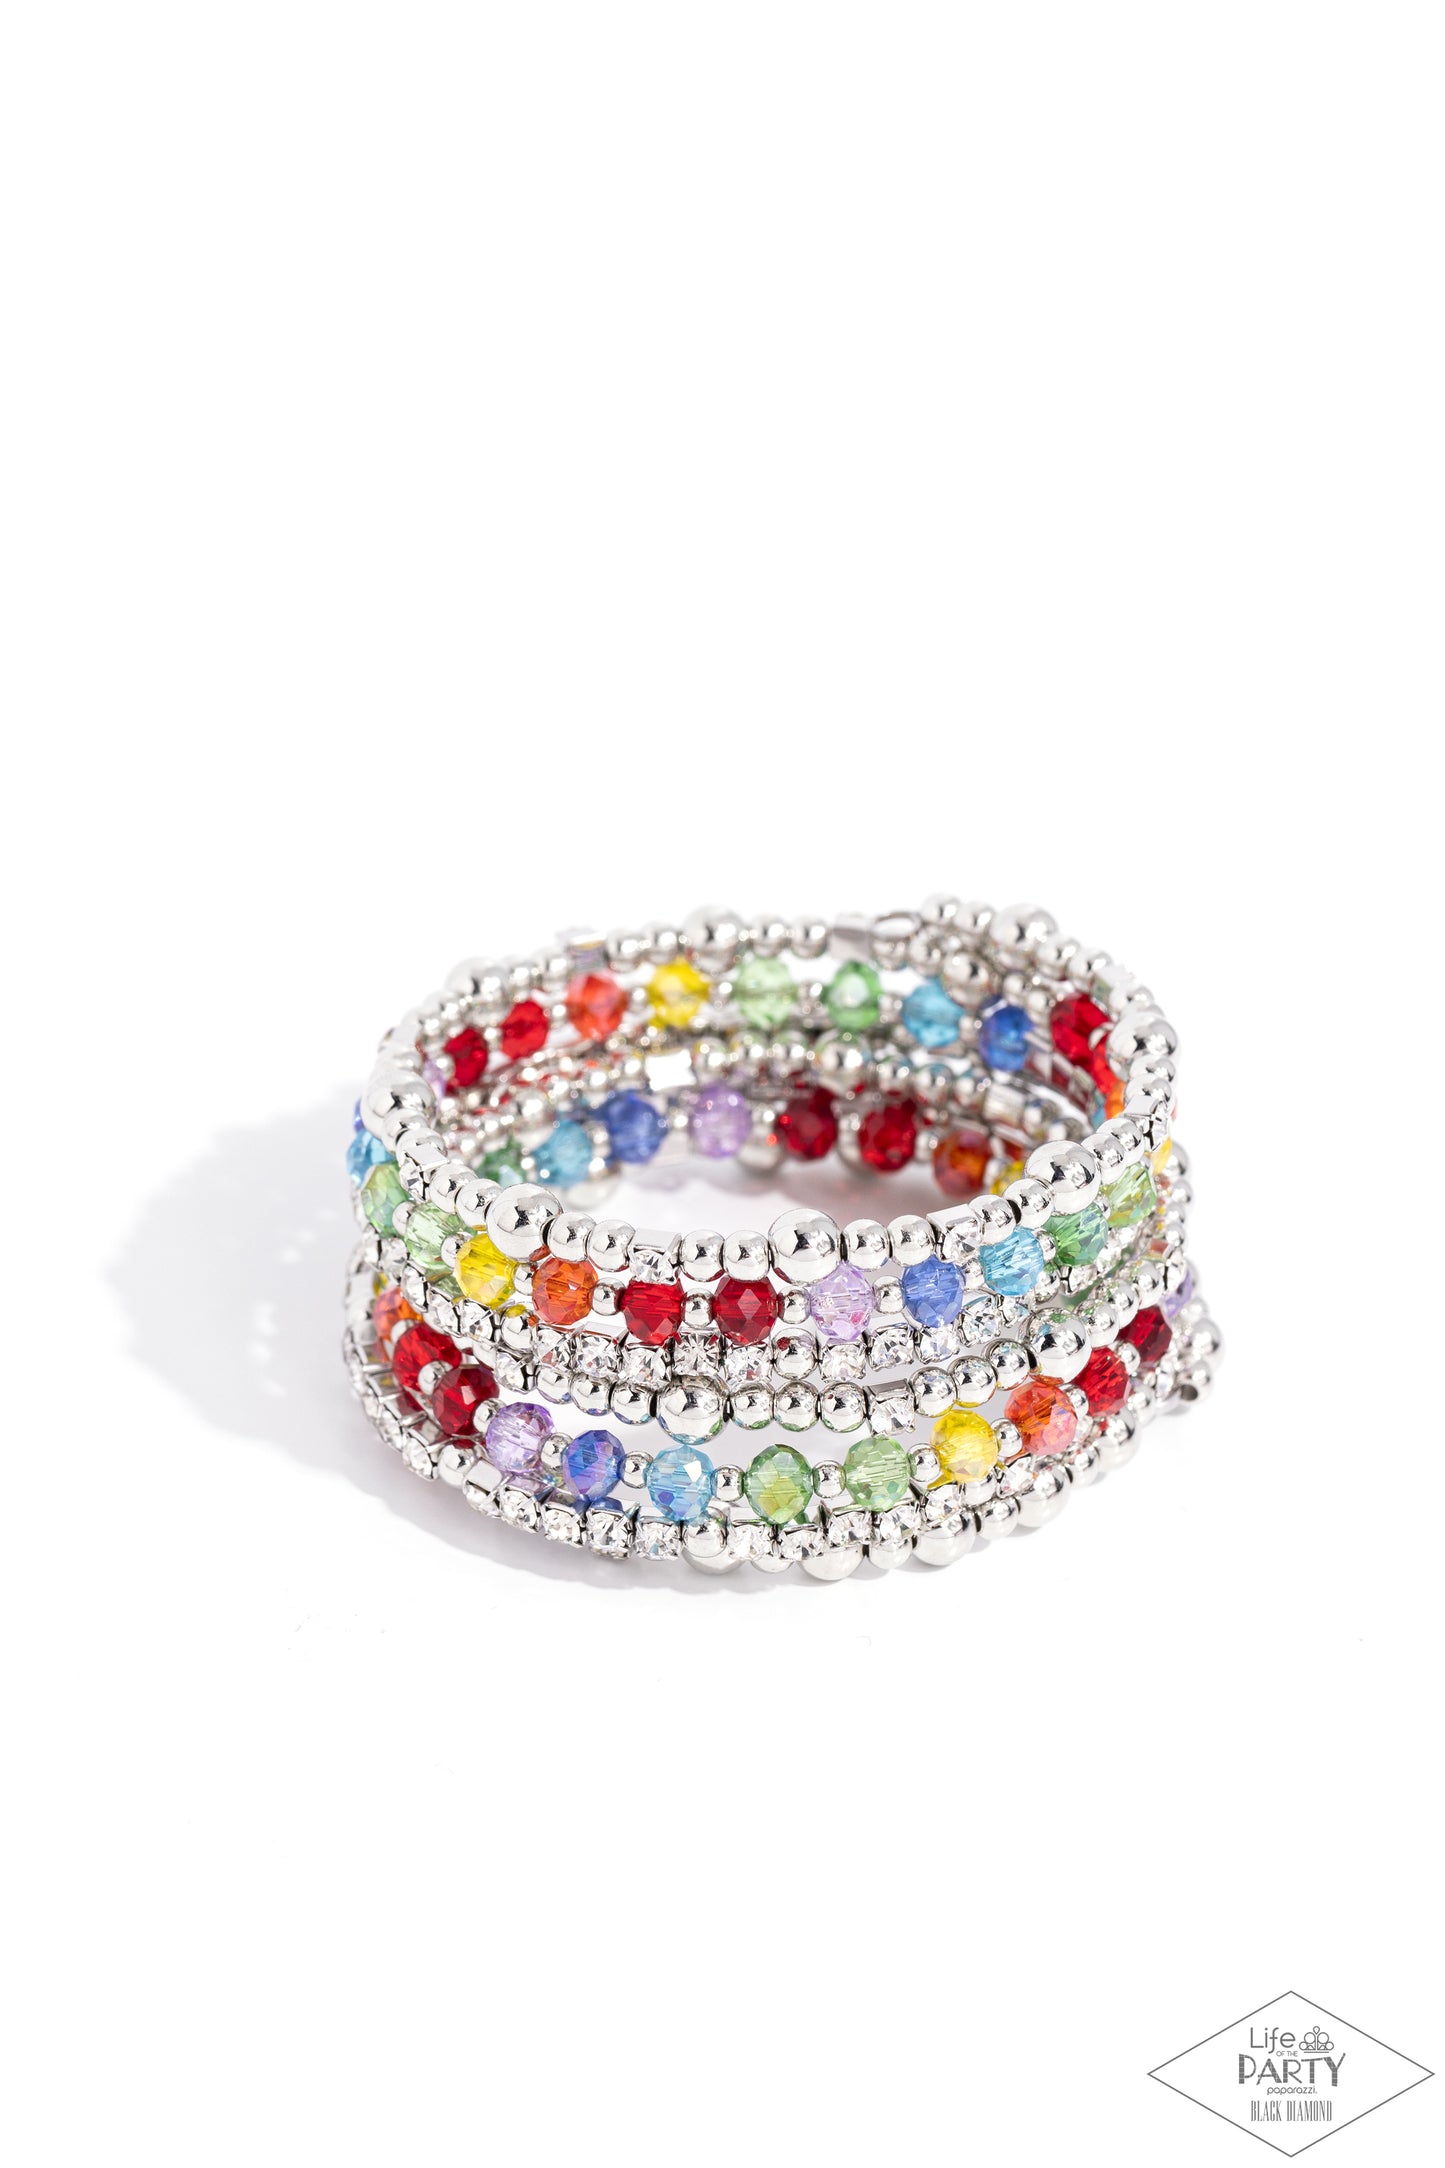 Ice Knowing You Multi LOP Coil Bracelet - Paparazzi Accessories  Item #P9RE-MTXX-134XX  An icy collection of silver beads, cubes, opaque crystals in various multicolored shades, and glassy white rhinestones are threaded along a coiled wire, creating a blinding infinity wrap style bracelet around the wrist.  Sold as one individual bracelet.  New Kit ENCORE This Black Diamond Encore is back in the spotlight at the request of our 2023 Life of the Party member with Black Diamond Access, Mandi W.